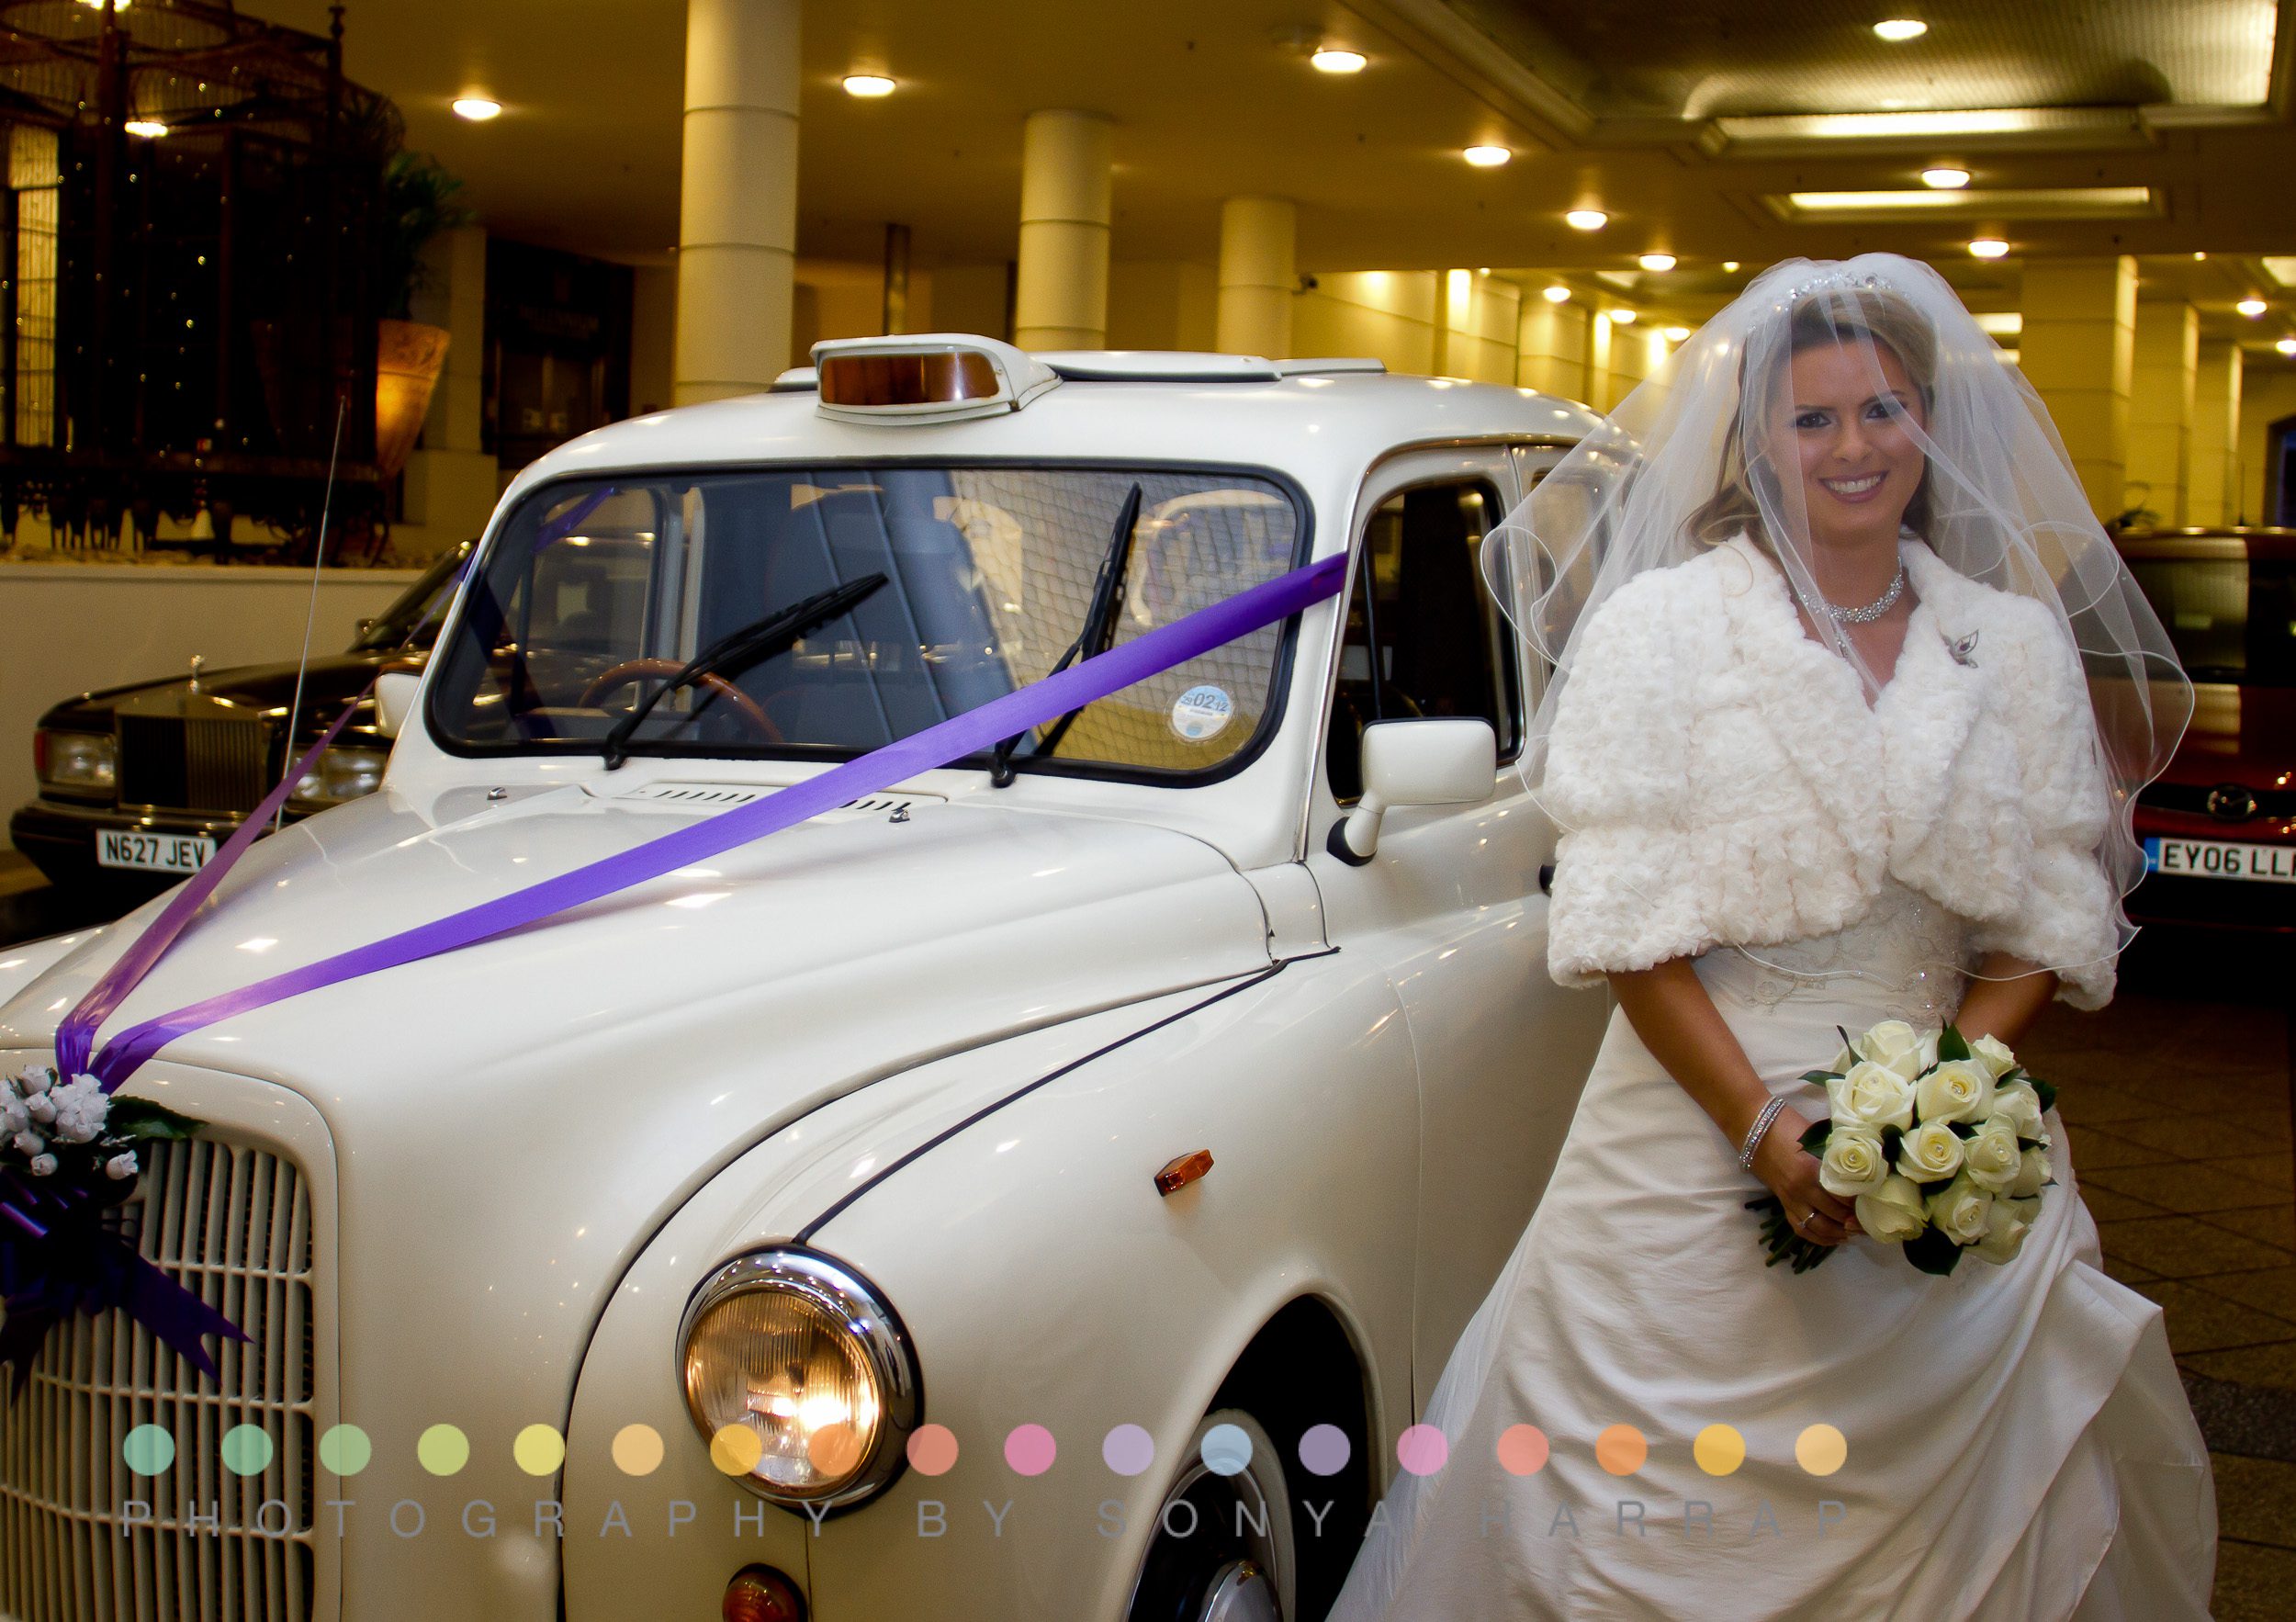 walking to the ceremony bright conservatory western bride a in central London millennium Gloucester hotel wedding standing outside white London taxi